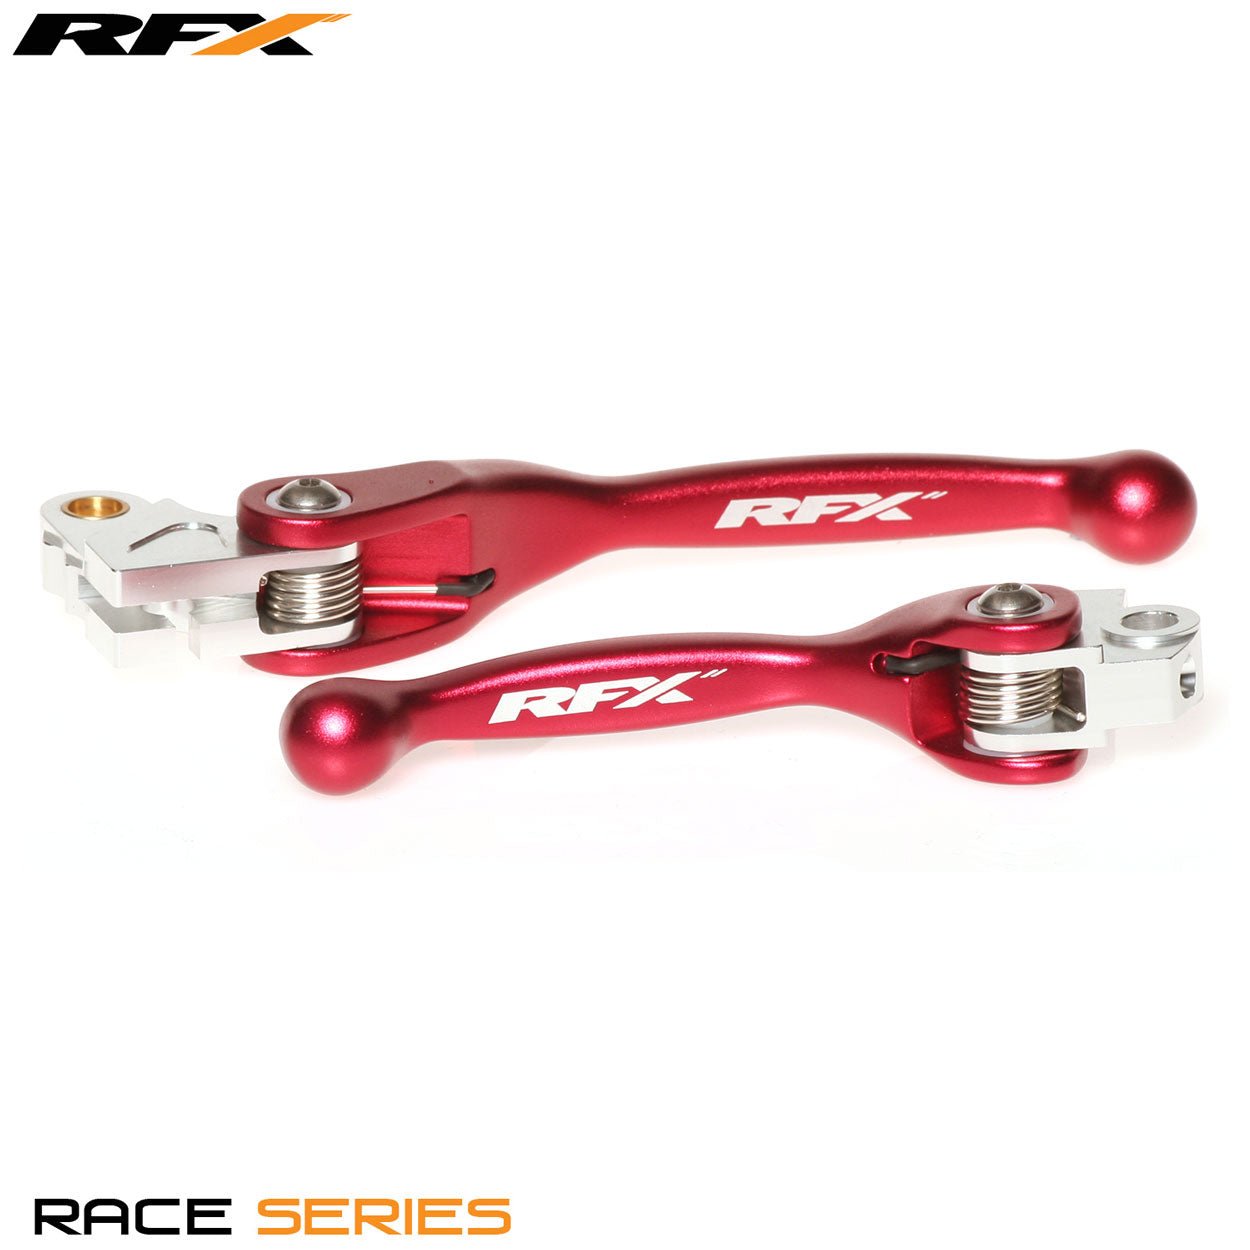 RFX Race Forged Flexible Lever Set (Red) Honda CR125/250 04-07 CRF250/450 04-06 CRFX250/450 04-20 - Red - RFX